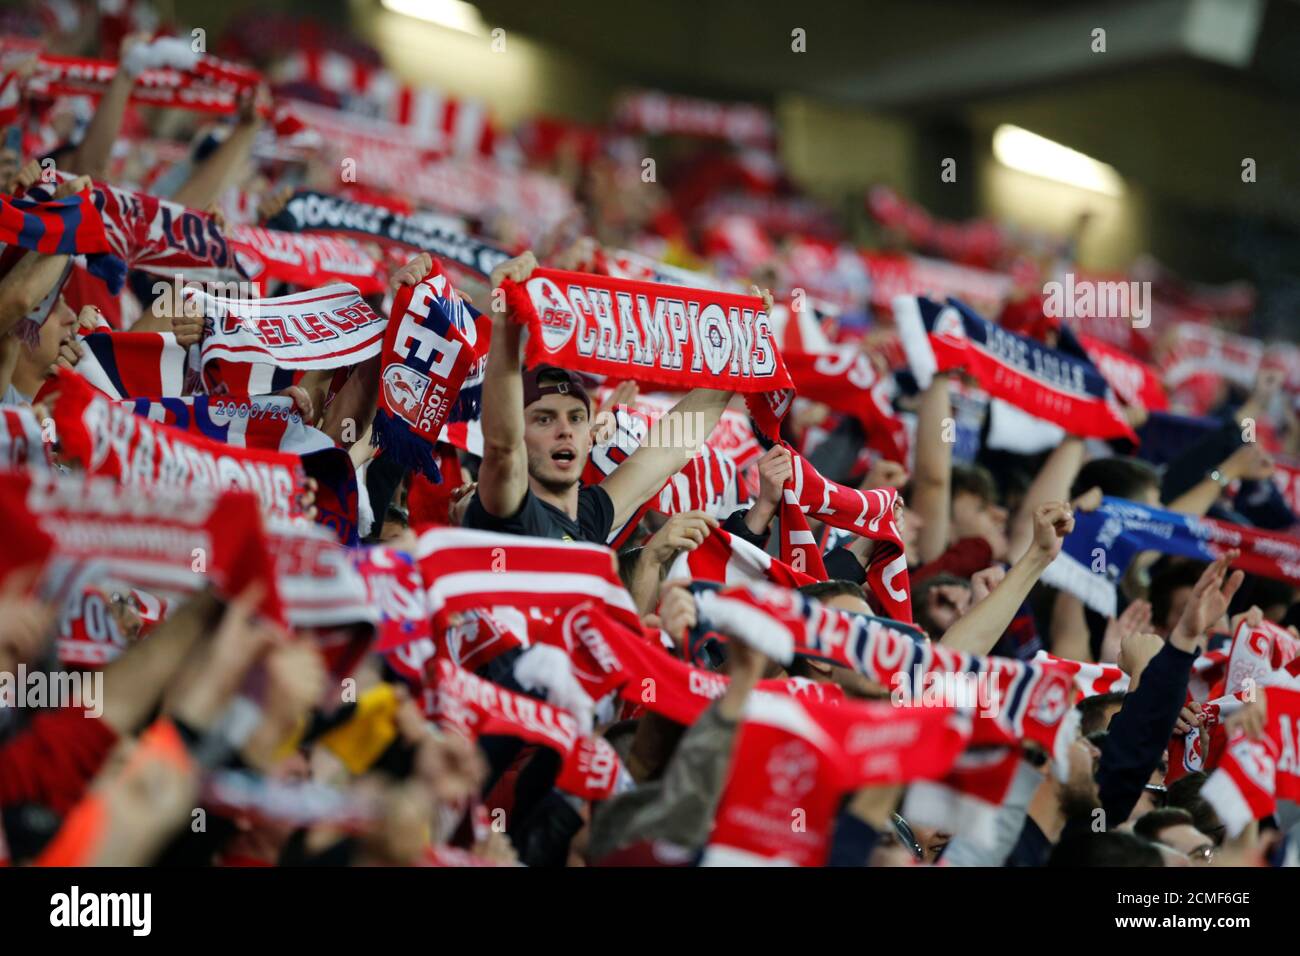 Soccer Football - Ligue 1 - Lille v Angers - Stade Pierre-Mauroy, Lille, France - May 18, 2019   Lille fans with scarves     REUTERS/Pascal Rossignol Stock Photo